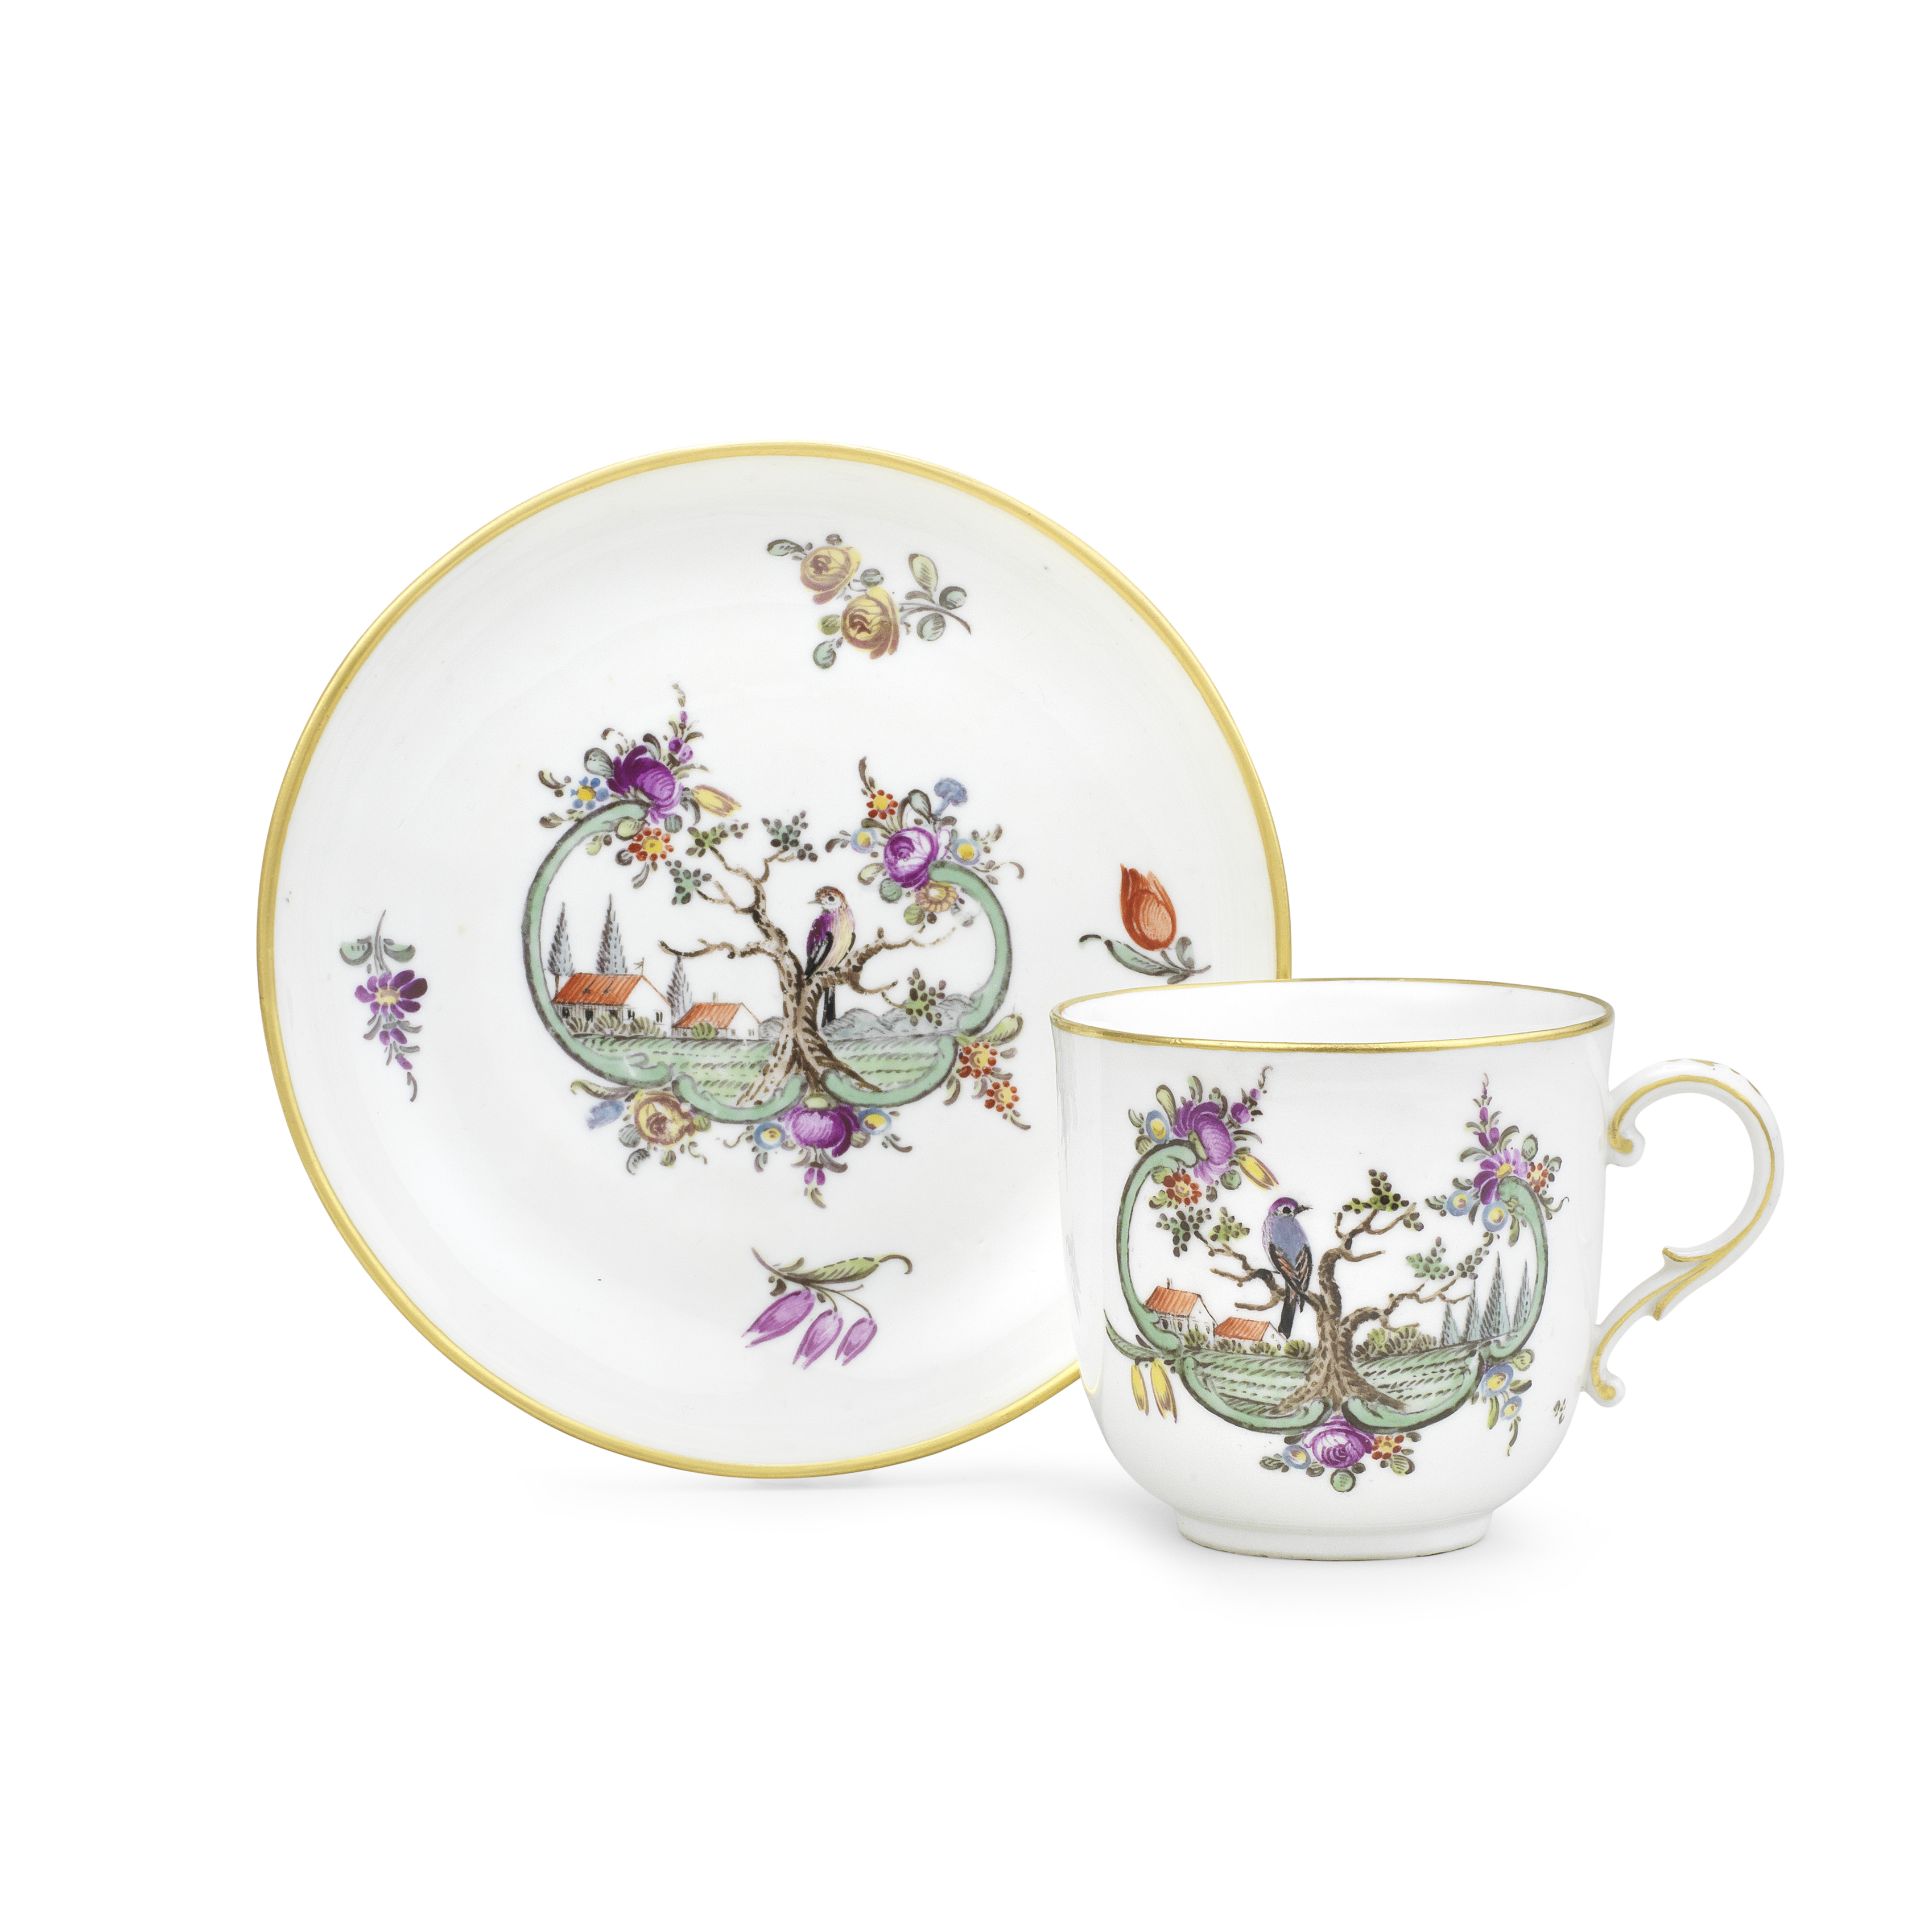 A Nymphenburg coffee cup and saucer, circa 1775